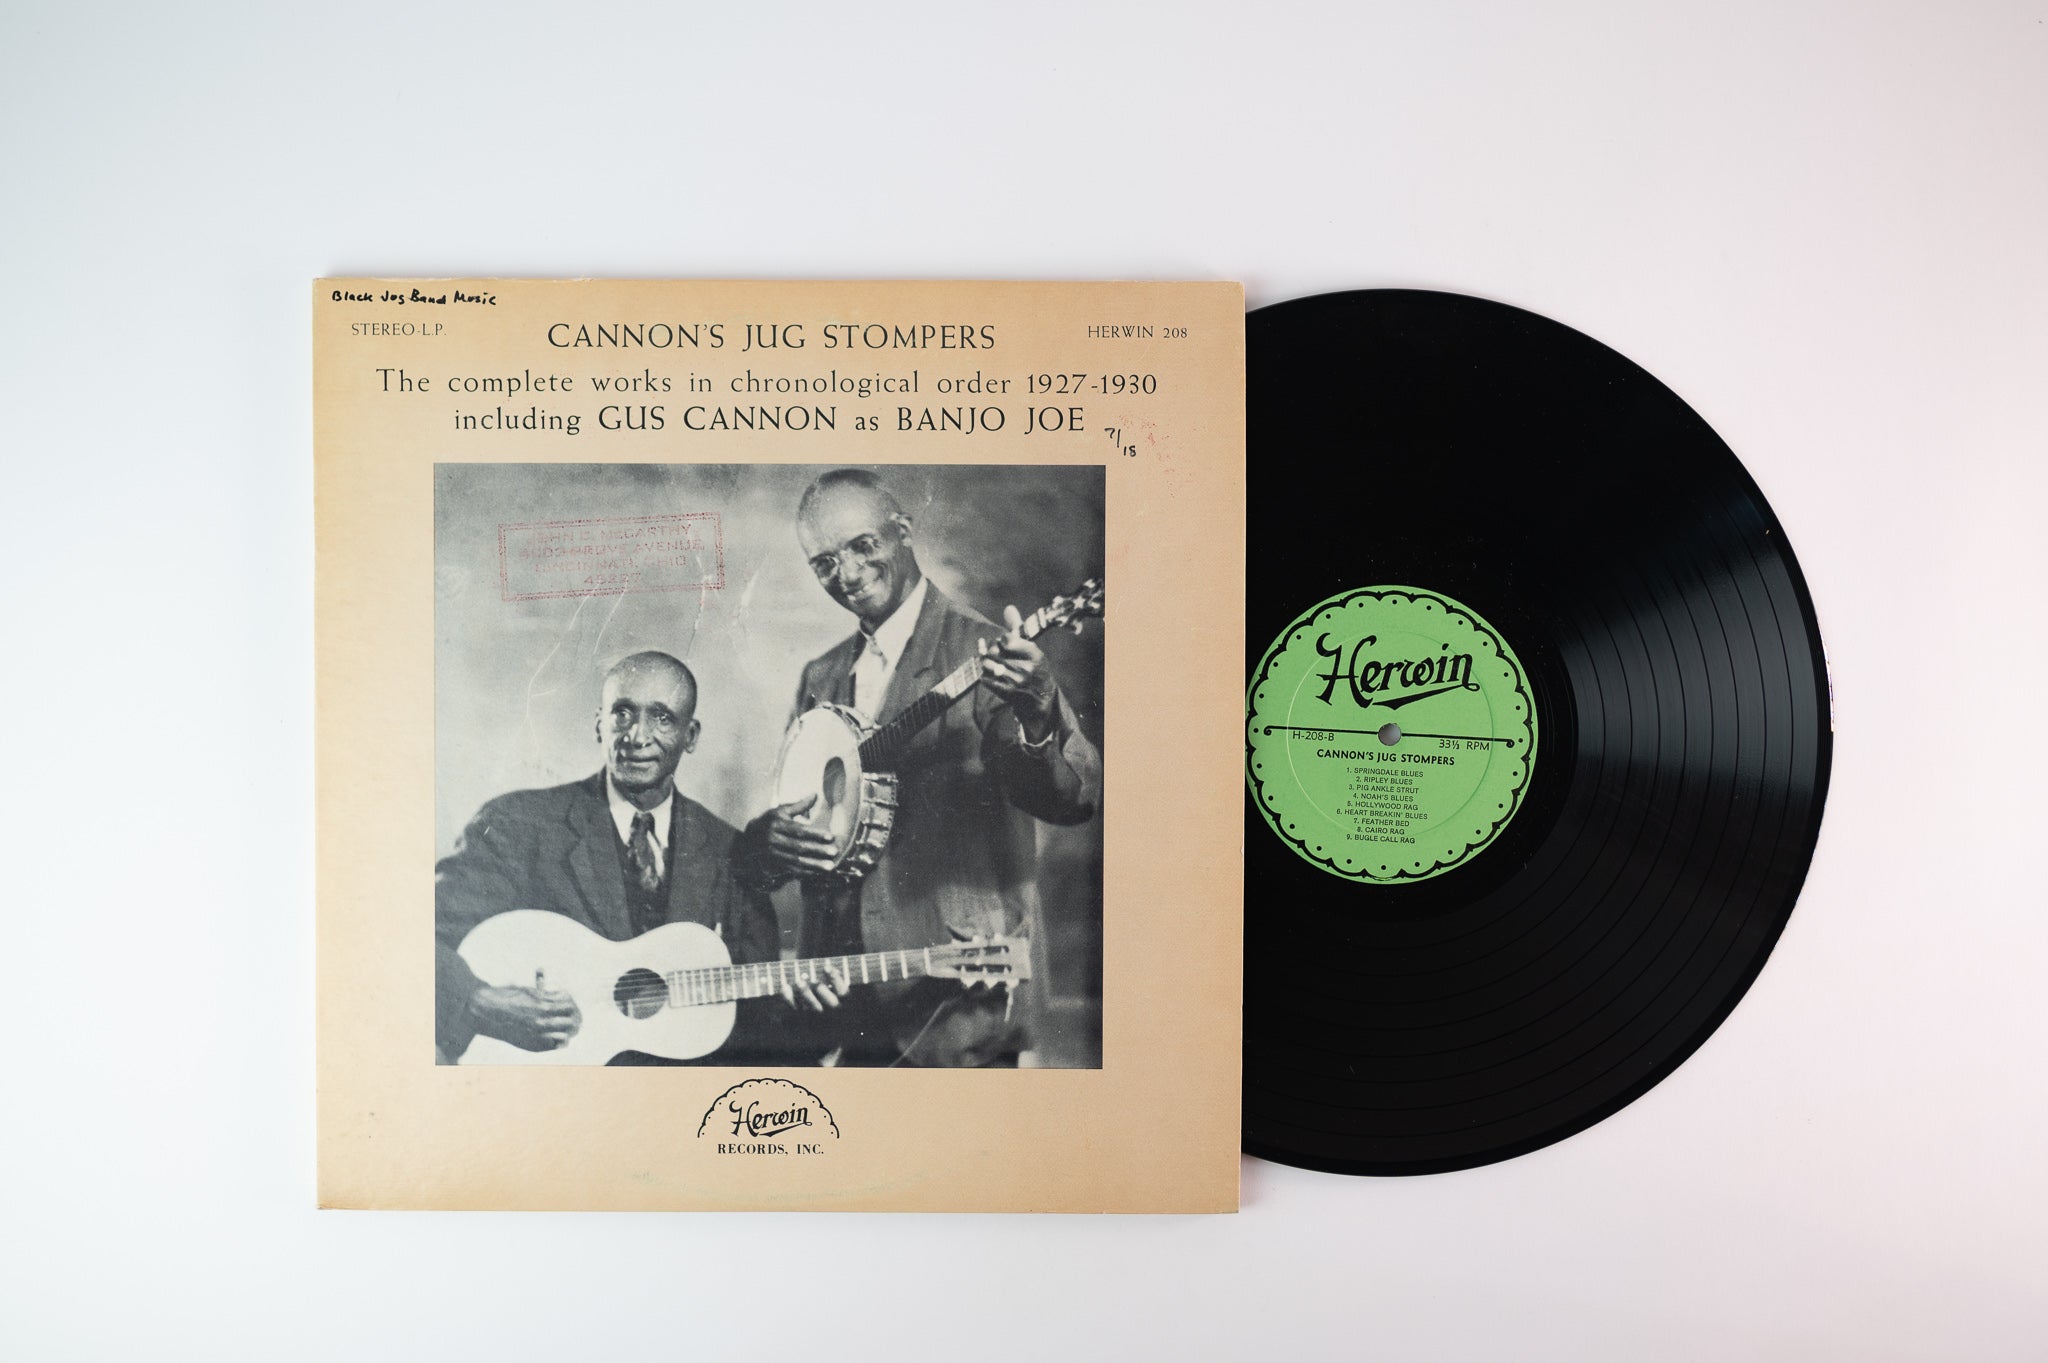 Cannon's Jug Stompers - The Complete Works In Chronological Order 1927-1930 on Herwin